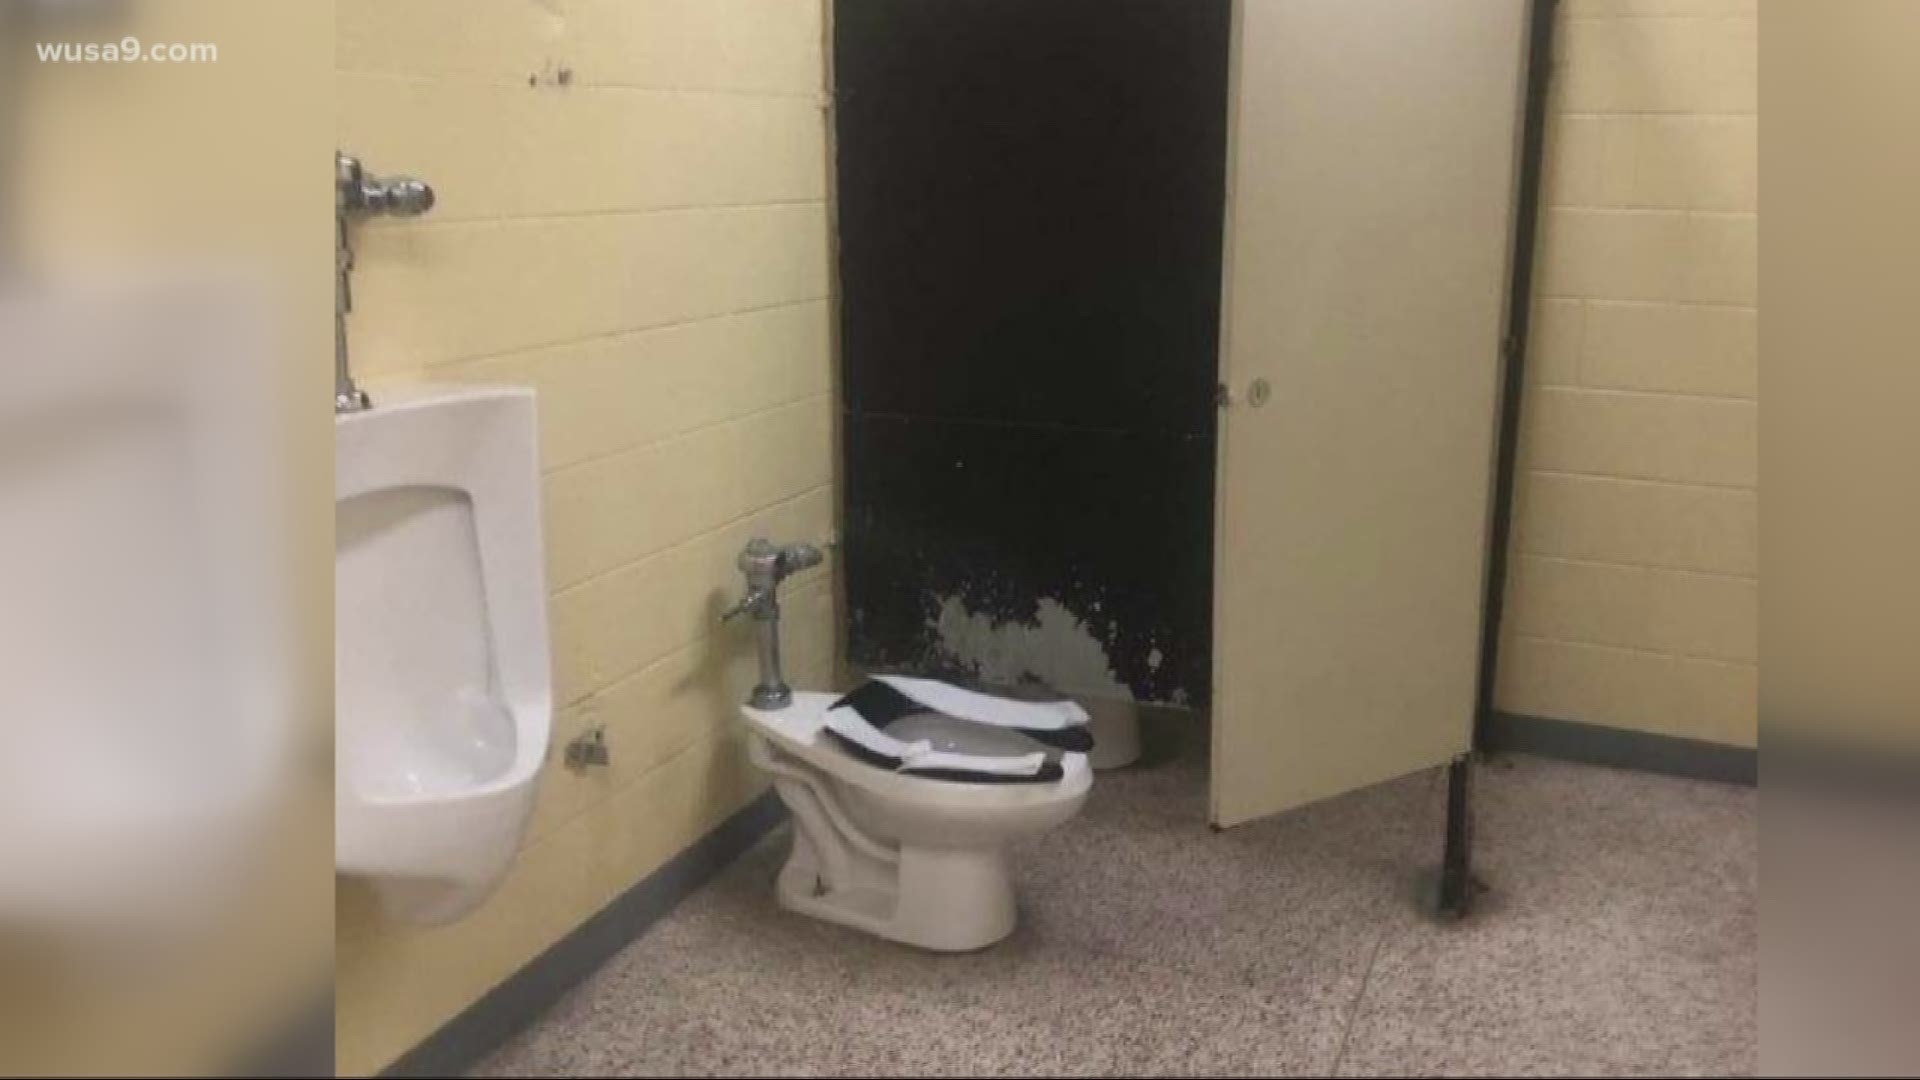 A Prince George’s County teacher exposed what appears to be decaying conditions at Parkdale High School.